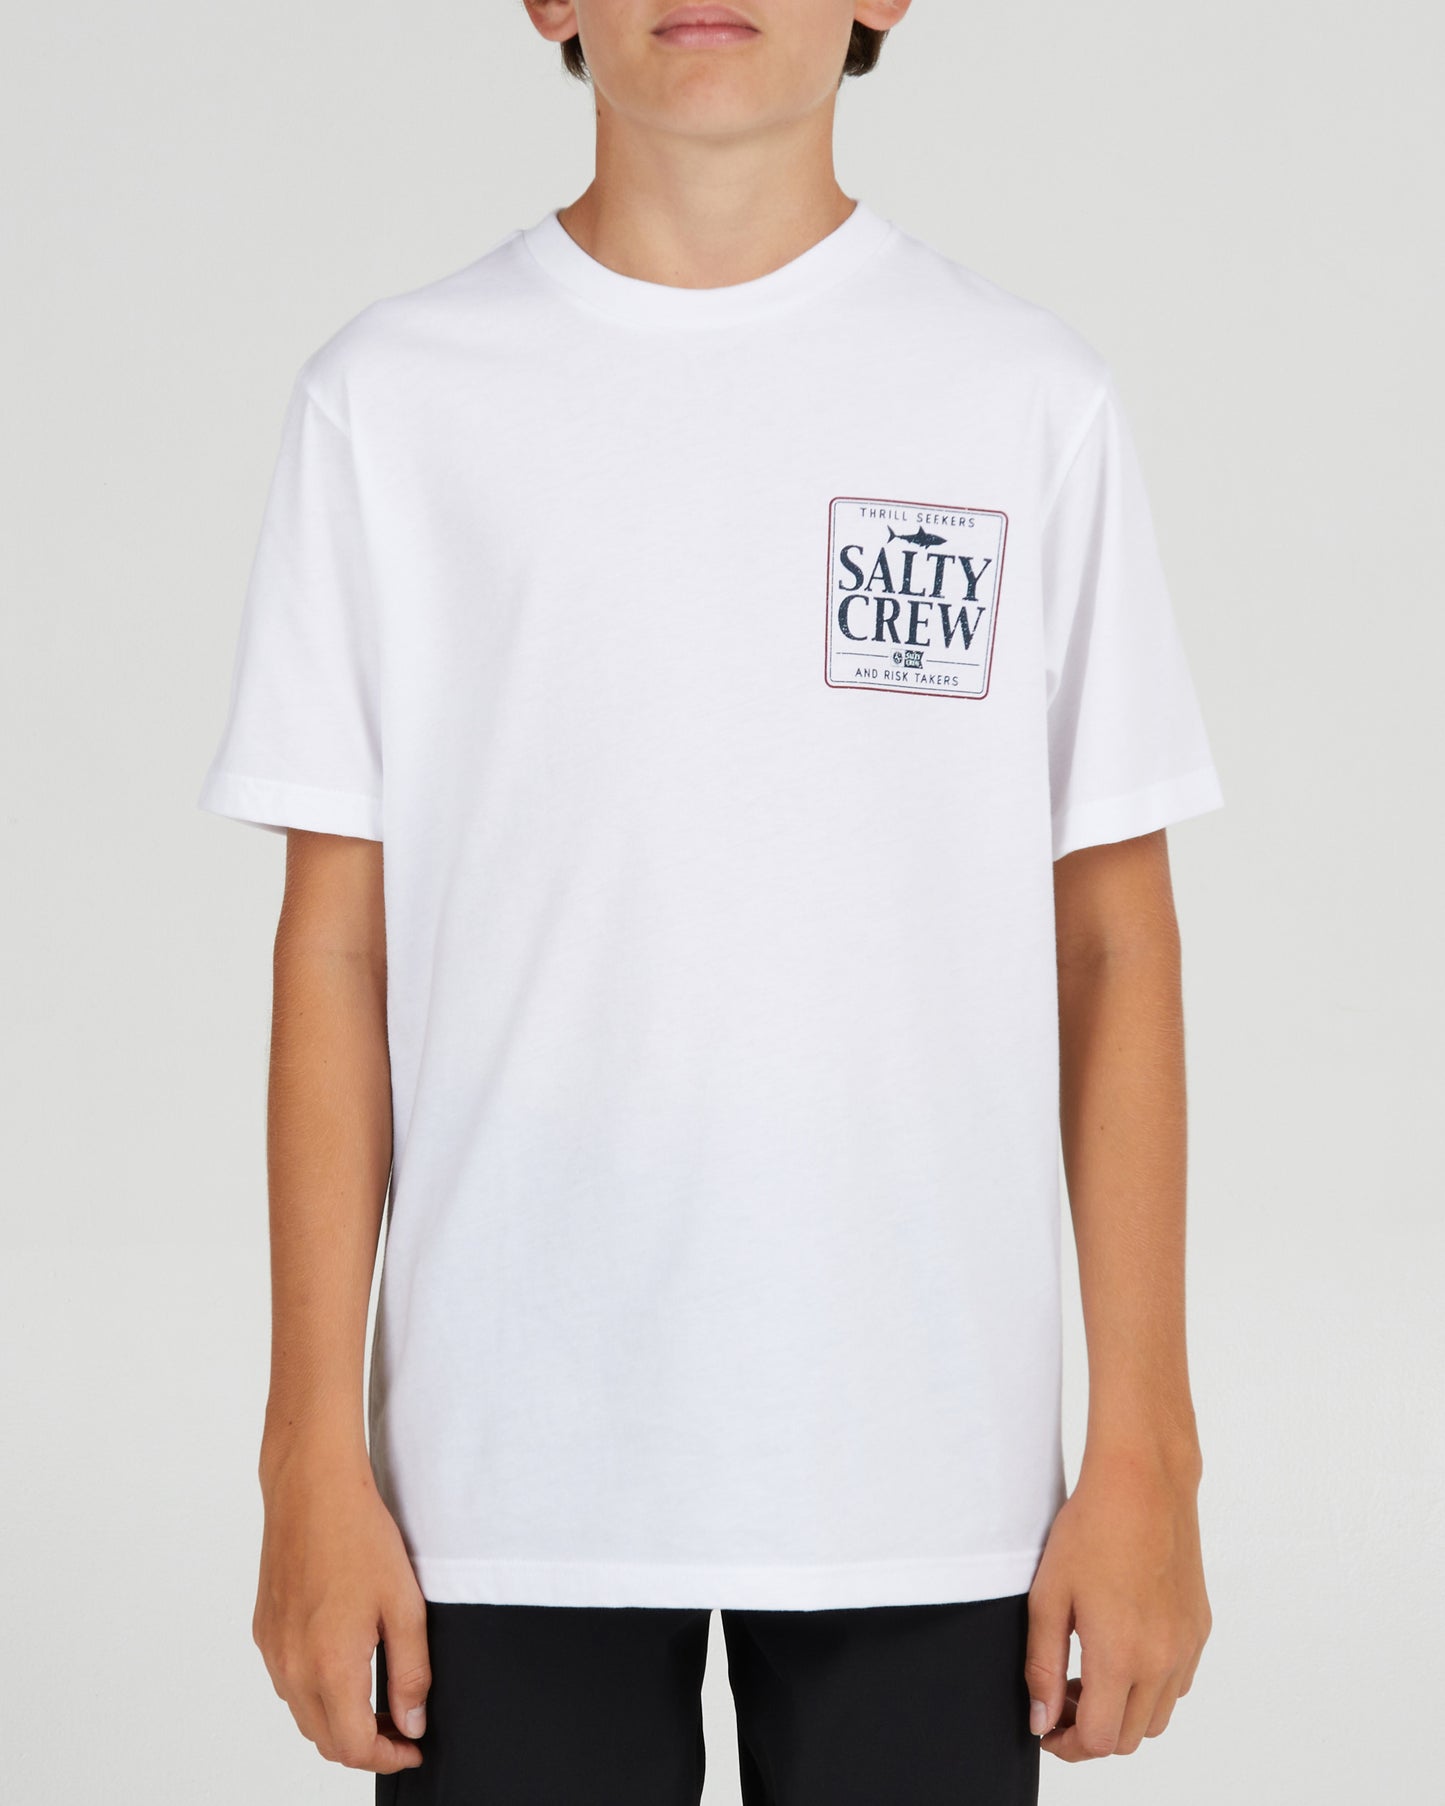 On body front of the Coaster Boys White S/S Tee